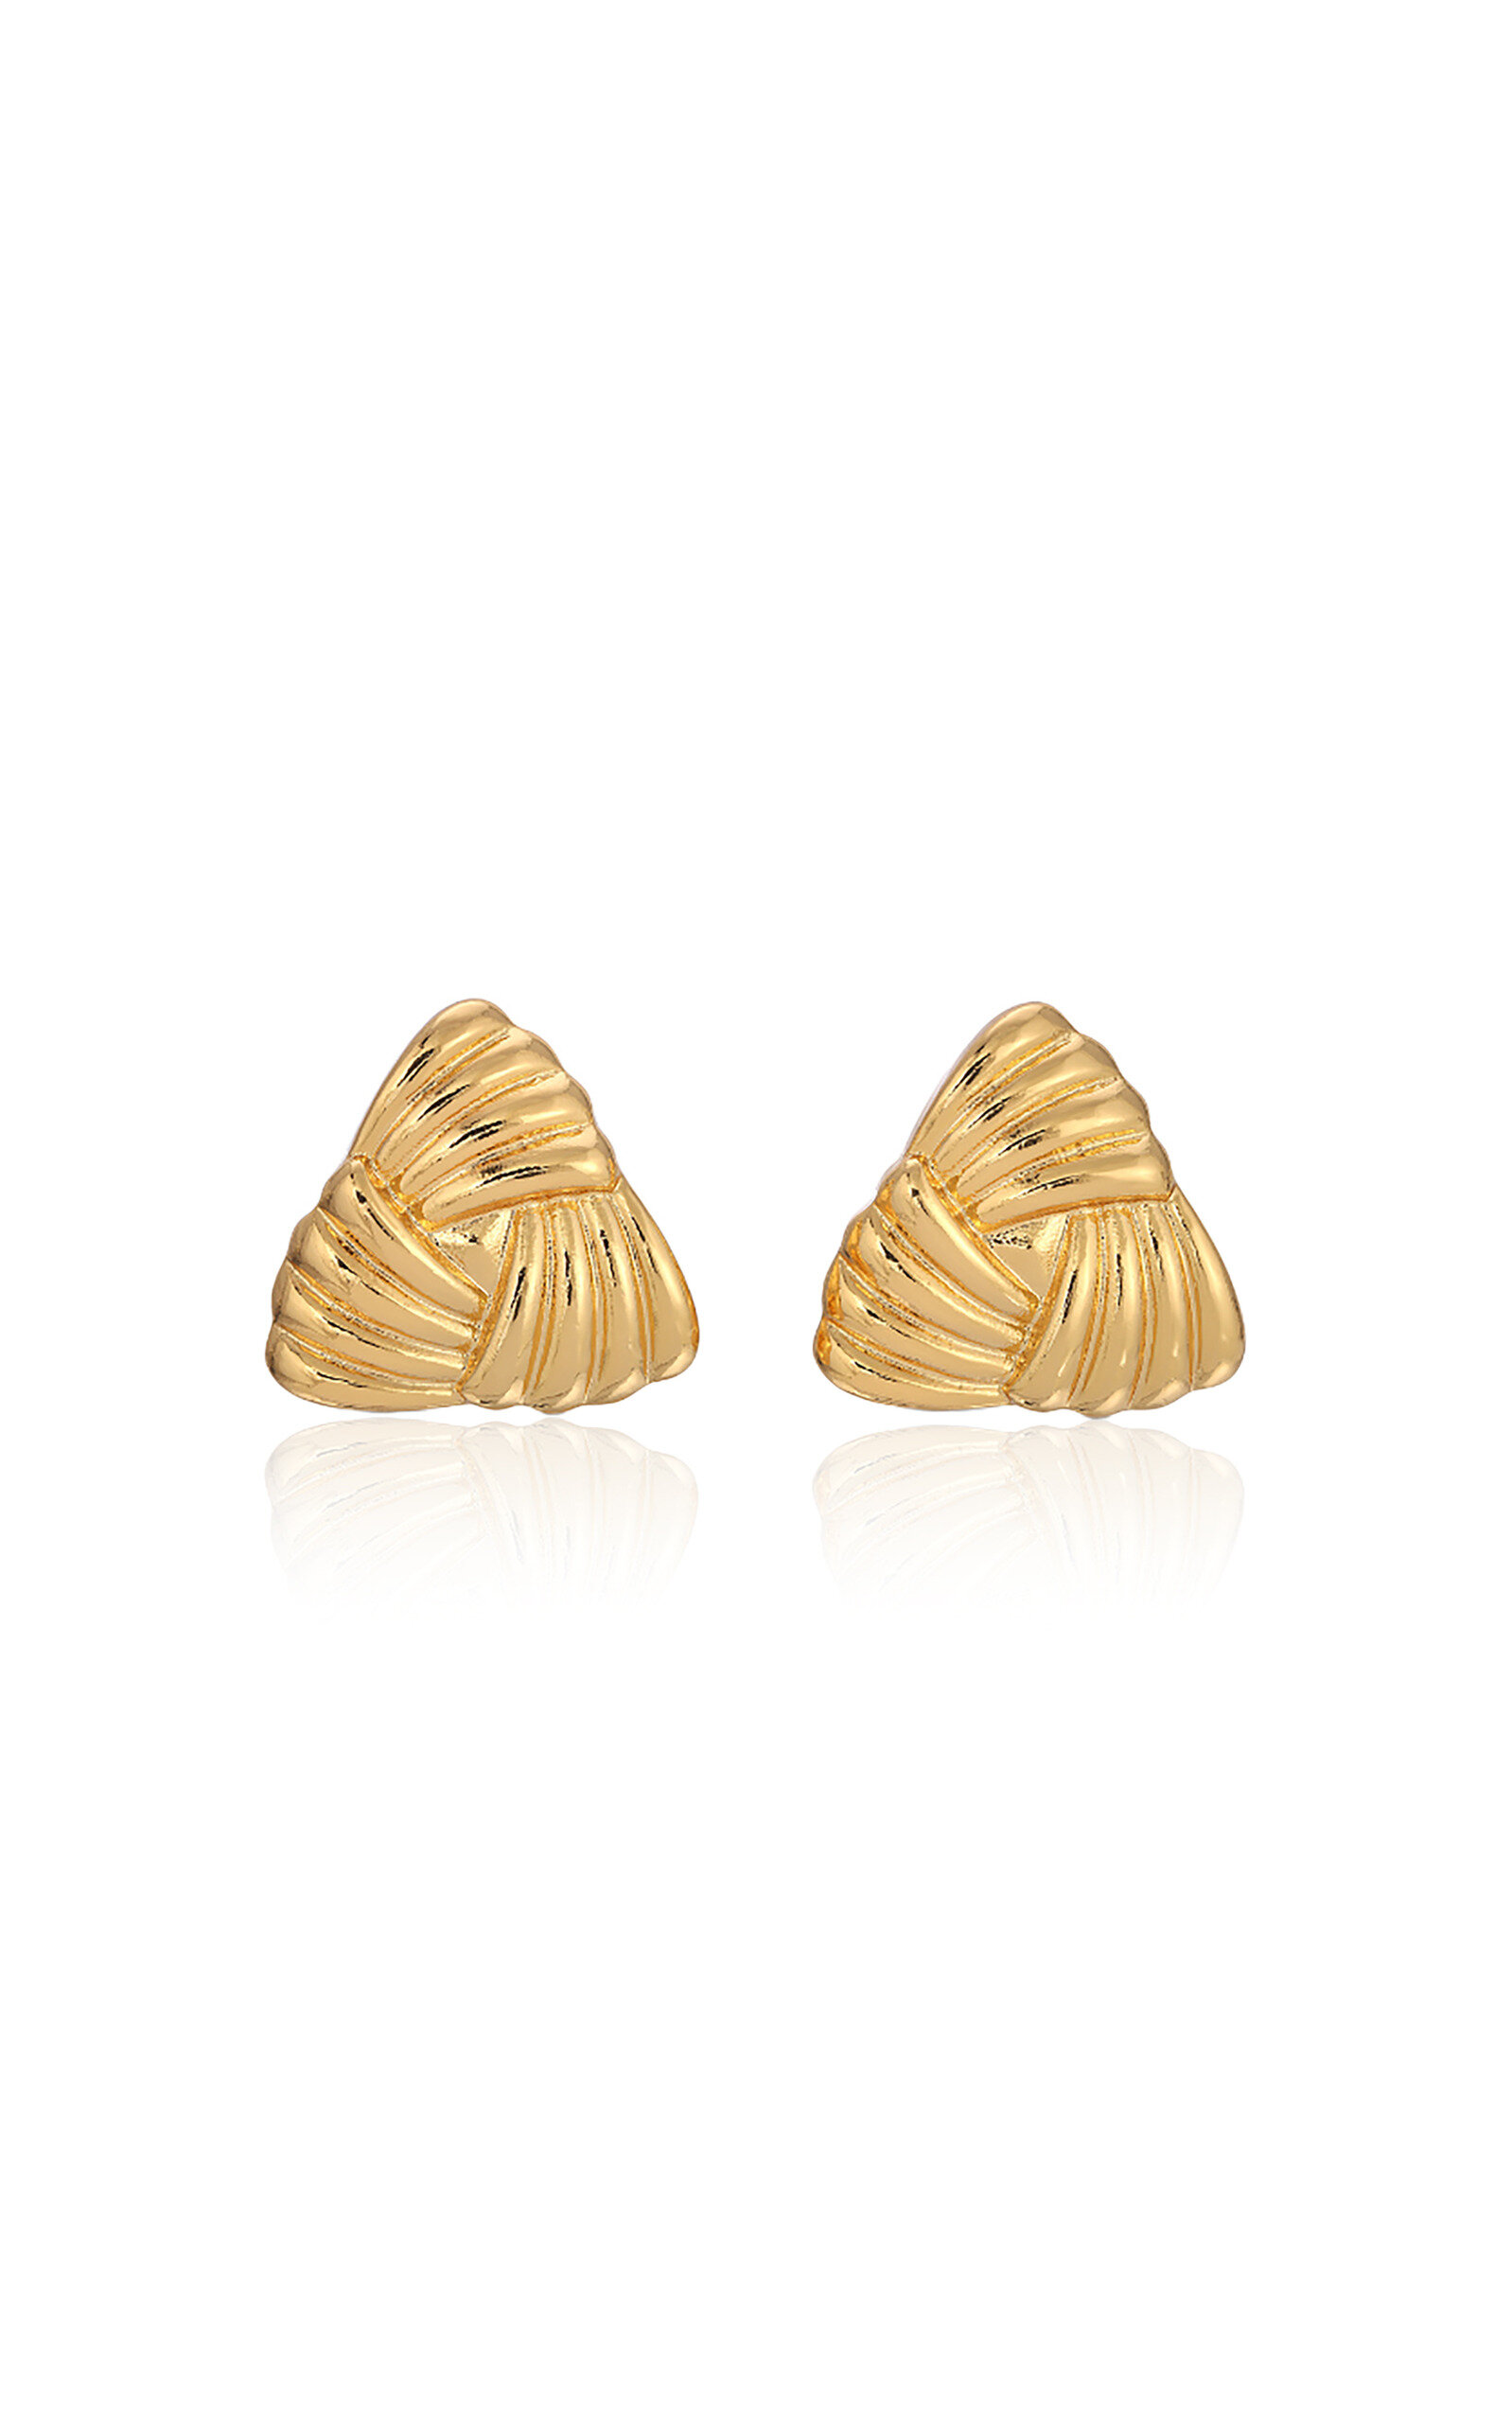 Tri Gold-Plated Earrings